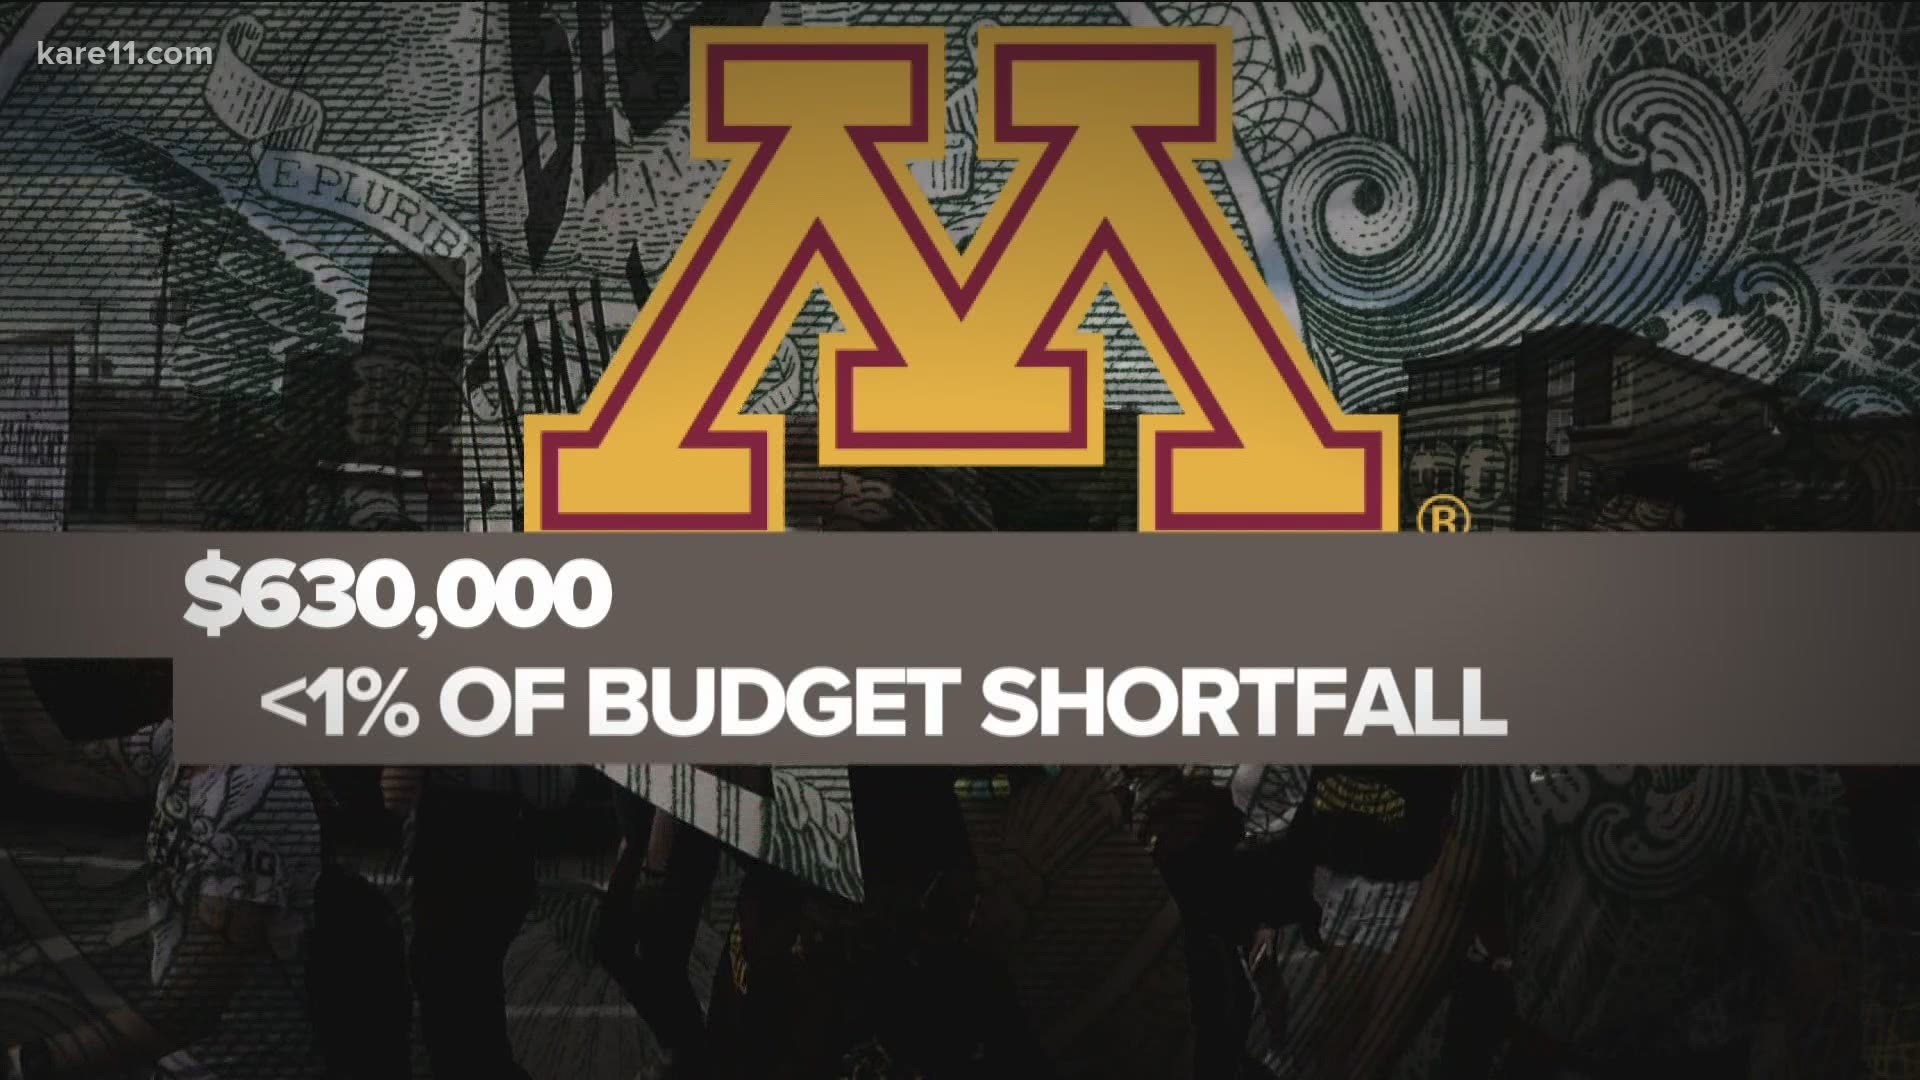 Track and Field doesn't make the University of Minnesota money, but its athletes will you tell it offers a lot.